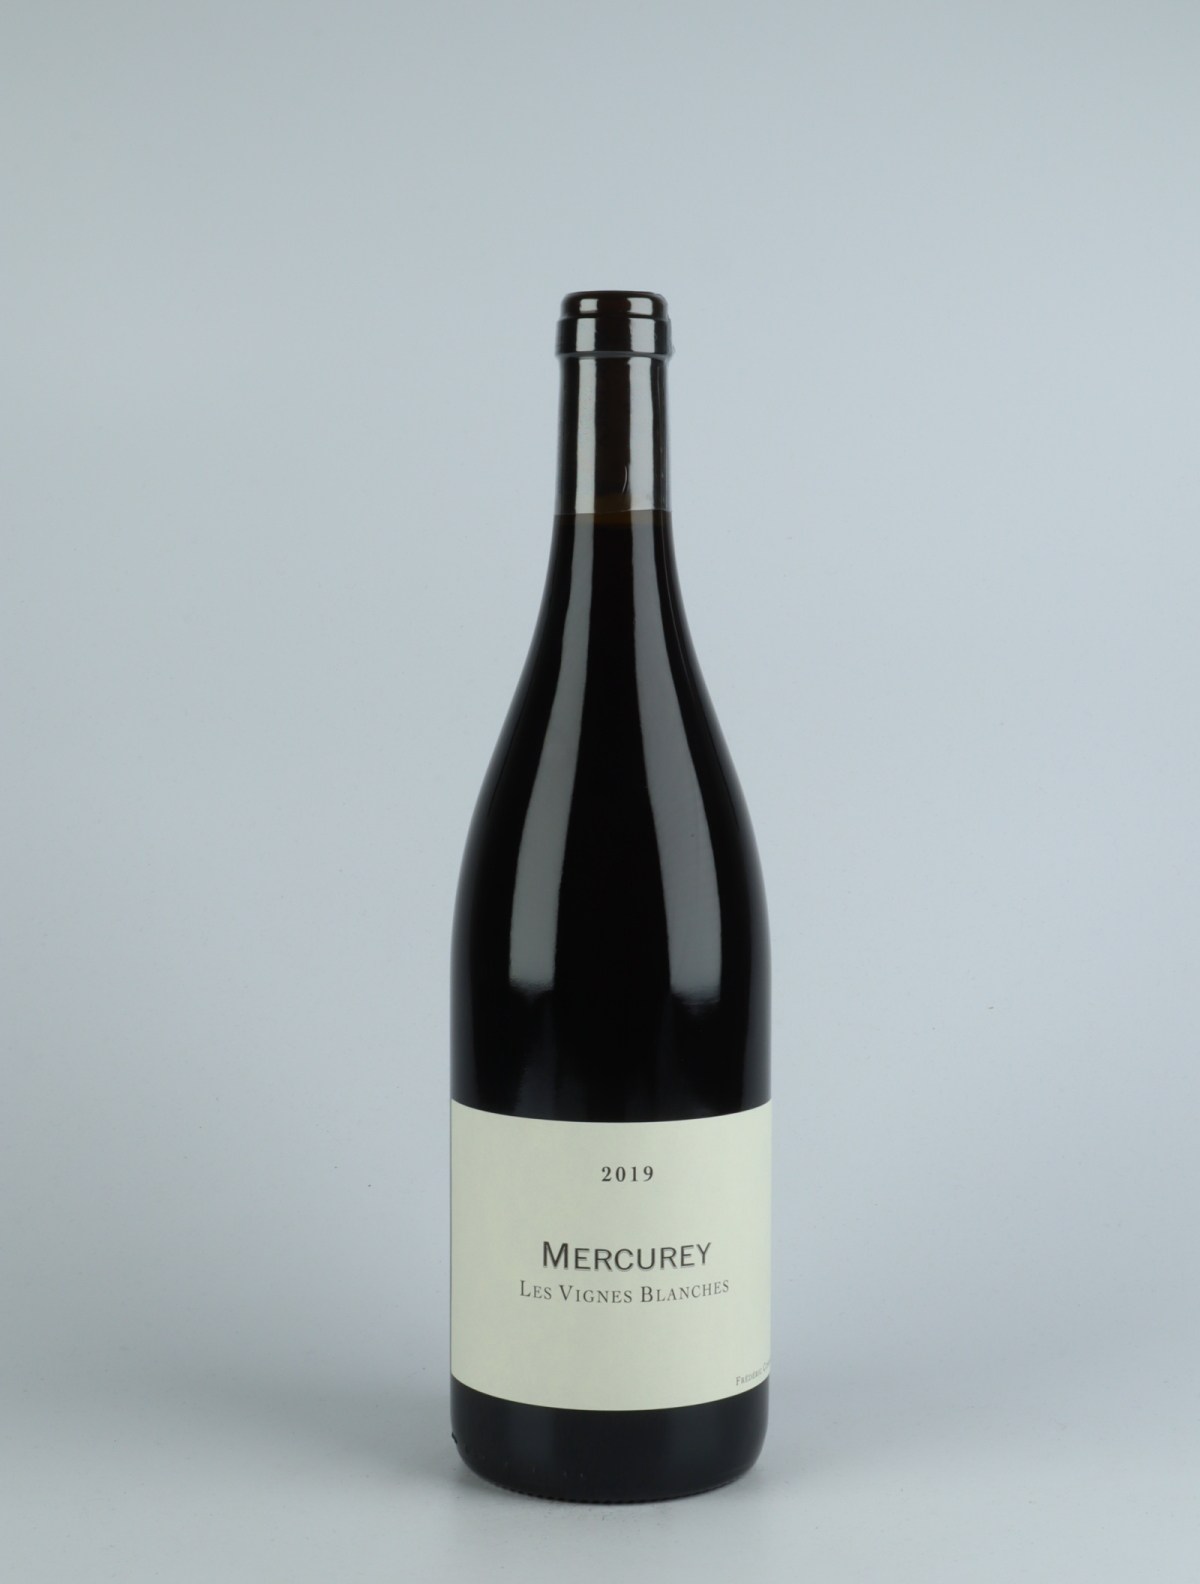 A bottle 2019 Mercurey - Les Vignes Blanches - Qvevris Red wine from Frédéric Cossard, Burgundy in France